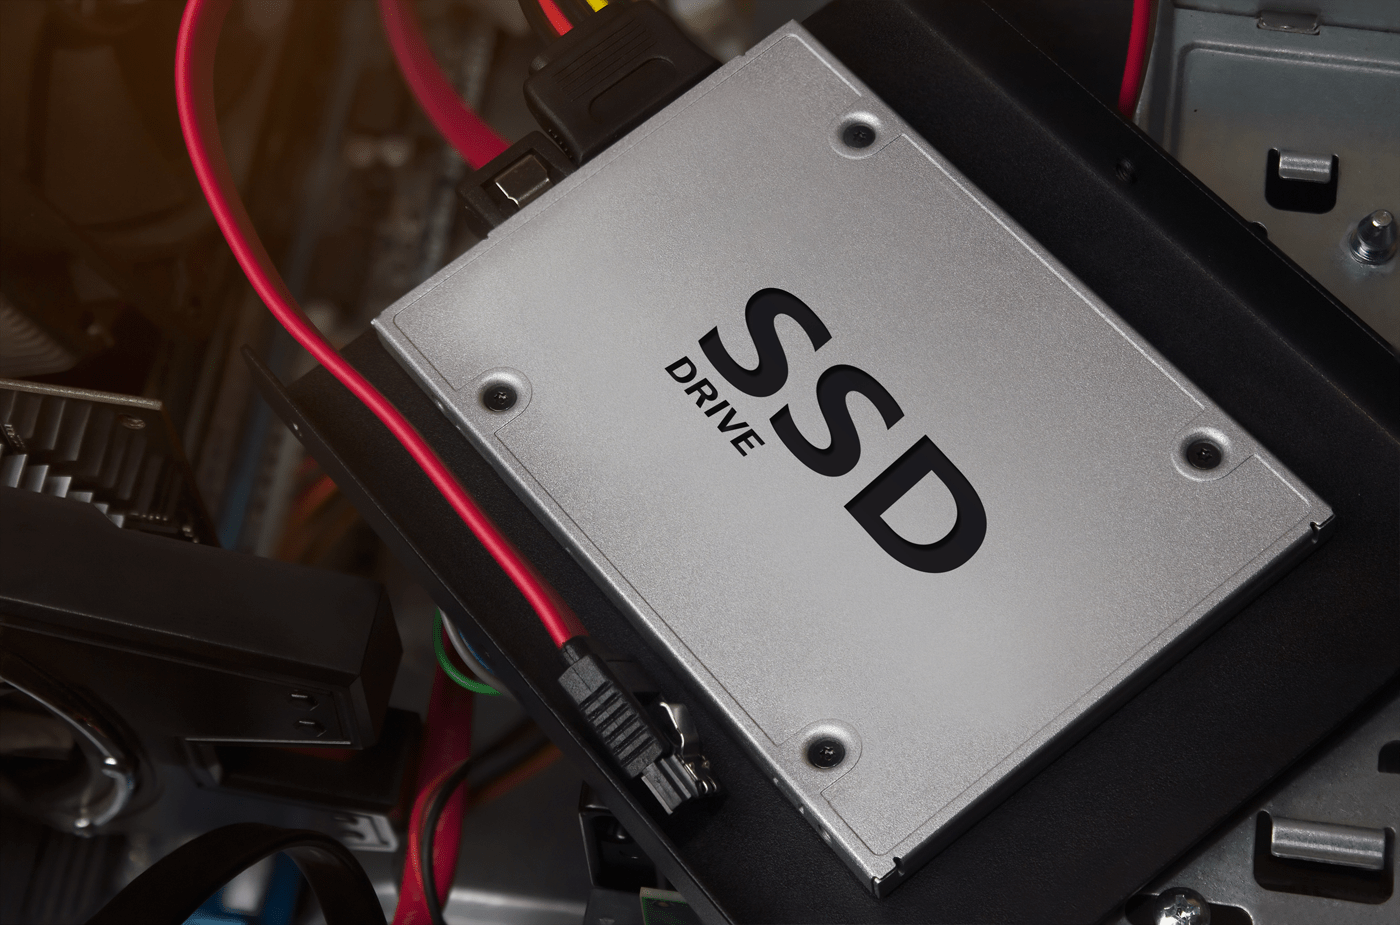 SSD vs Flash Drives: Which is the Ultimate Powerhouse Storage Winner? Calculate All